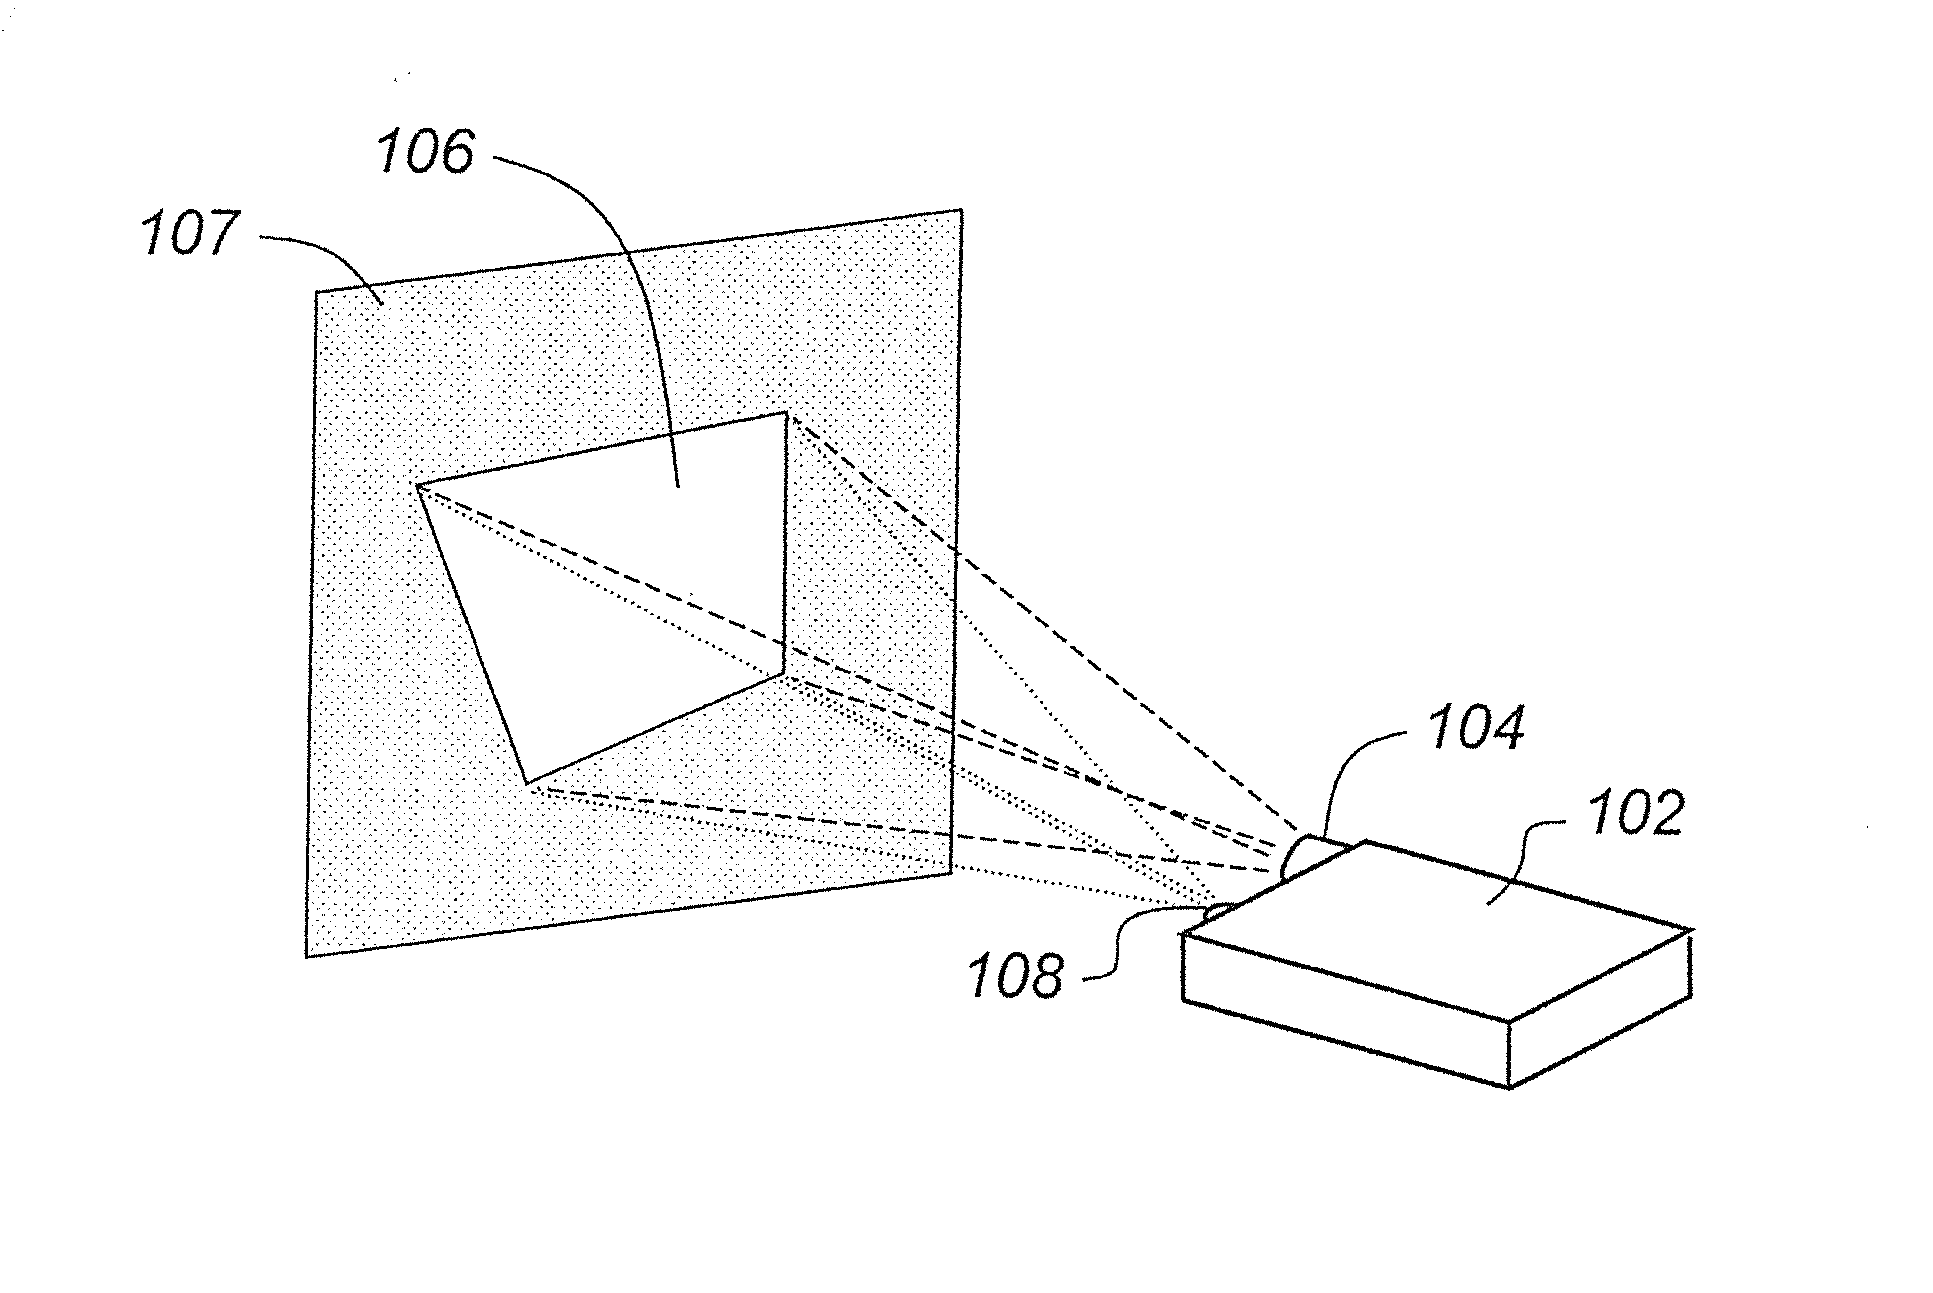 Image projection and control apparatus and methods